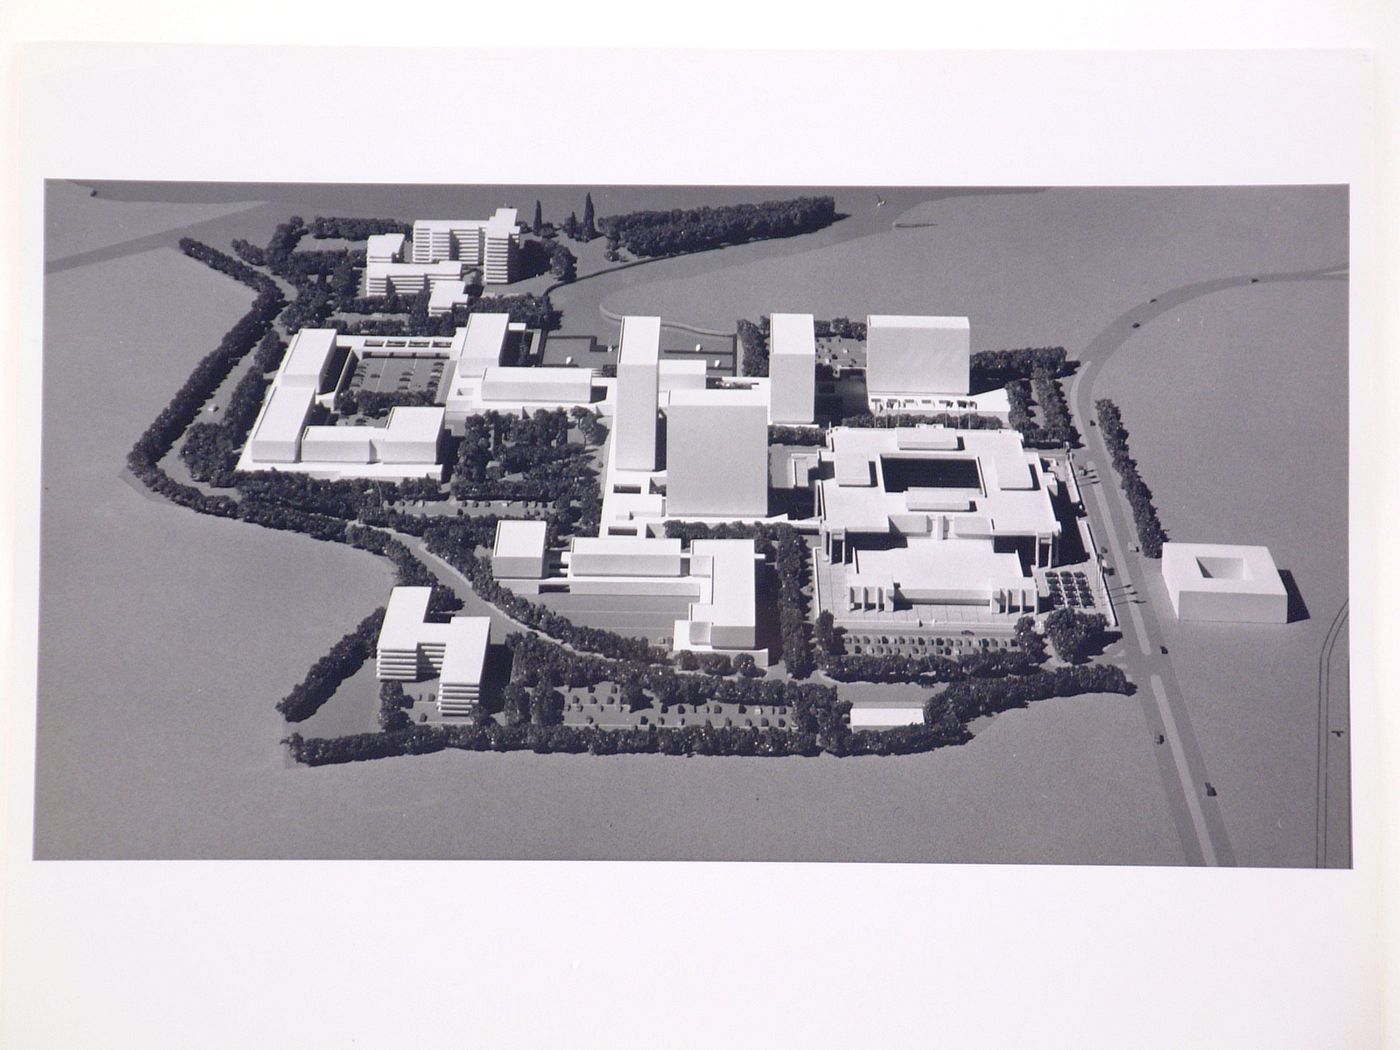 Aerial view of the model for the State Street South complex, Quincy, Massachusetts, United States